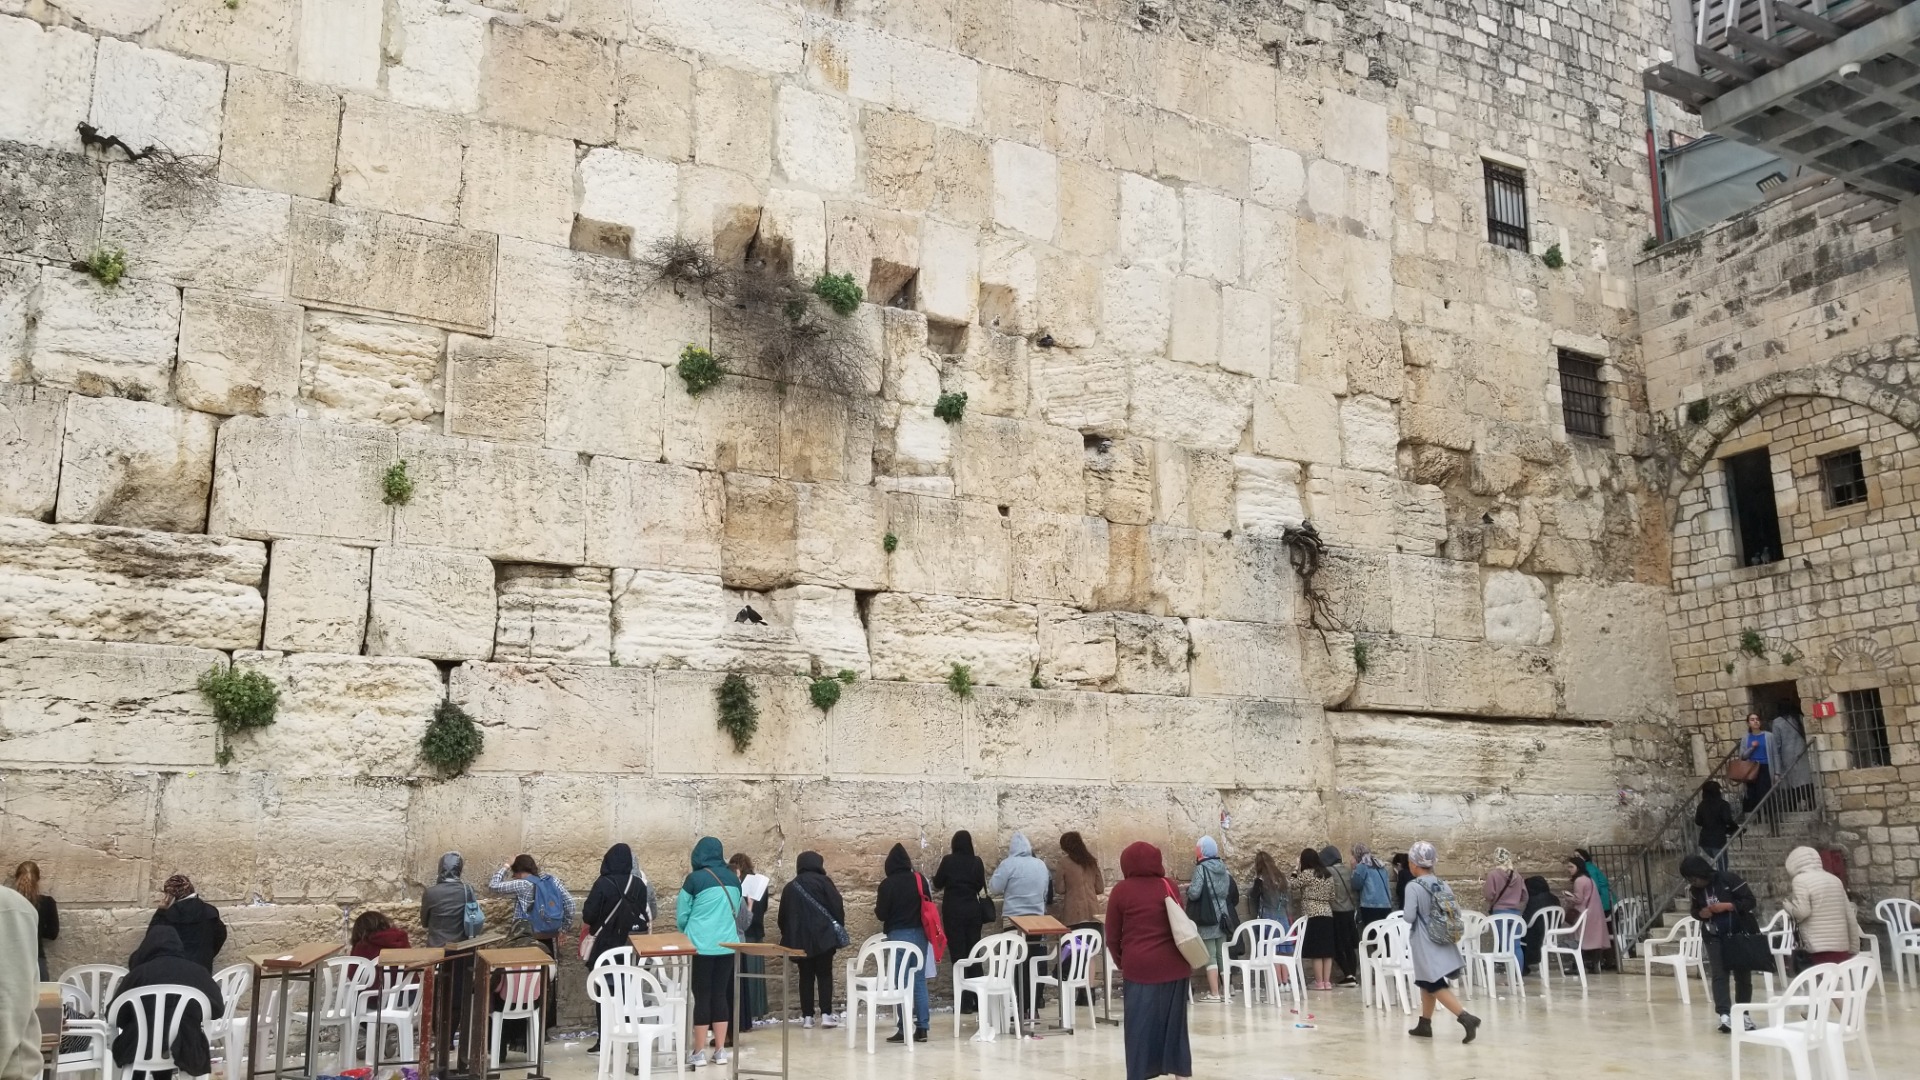 The Upper Room and Wailing Wall